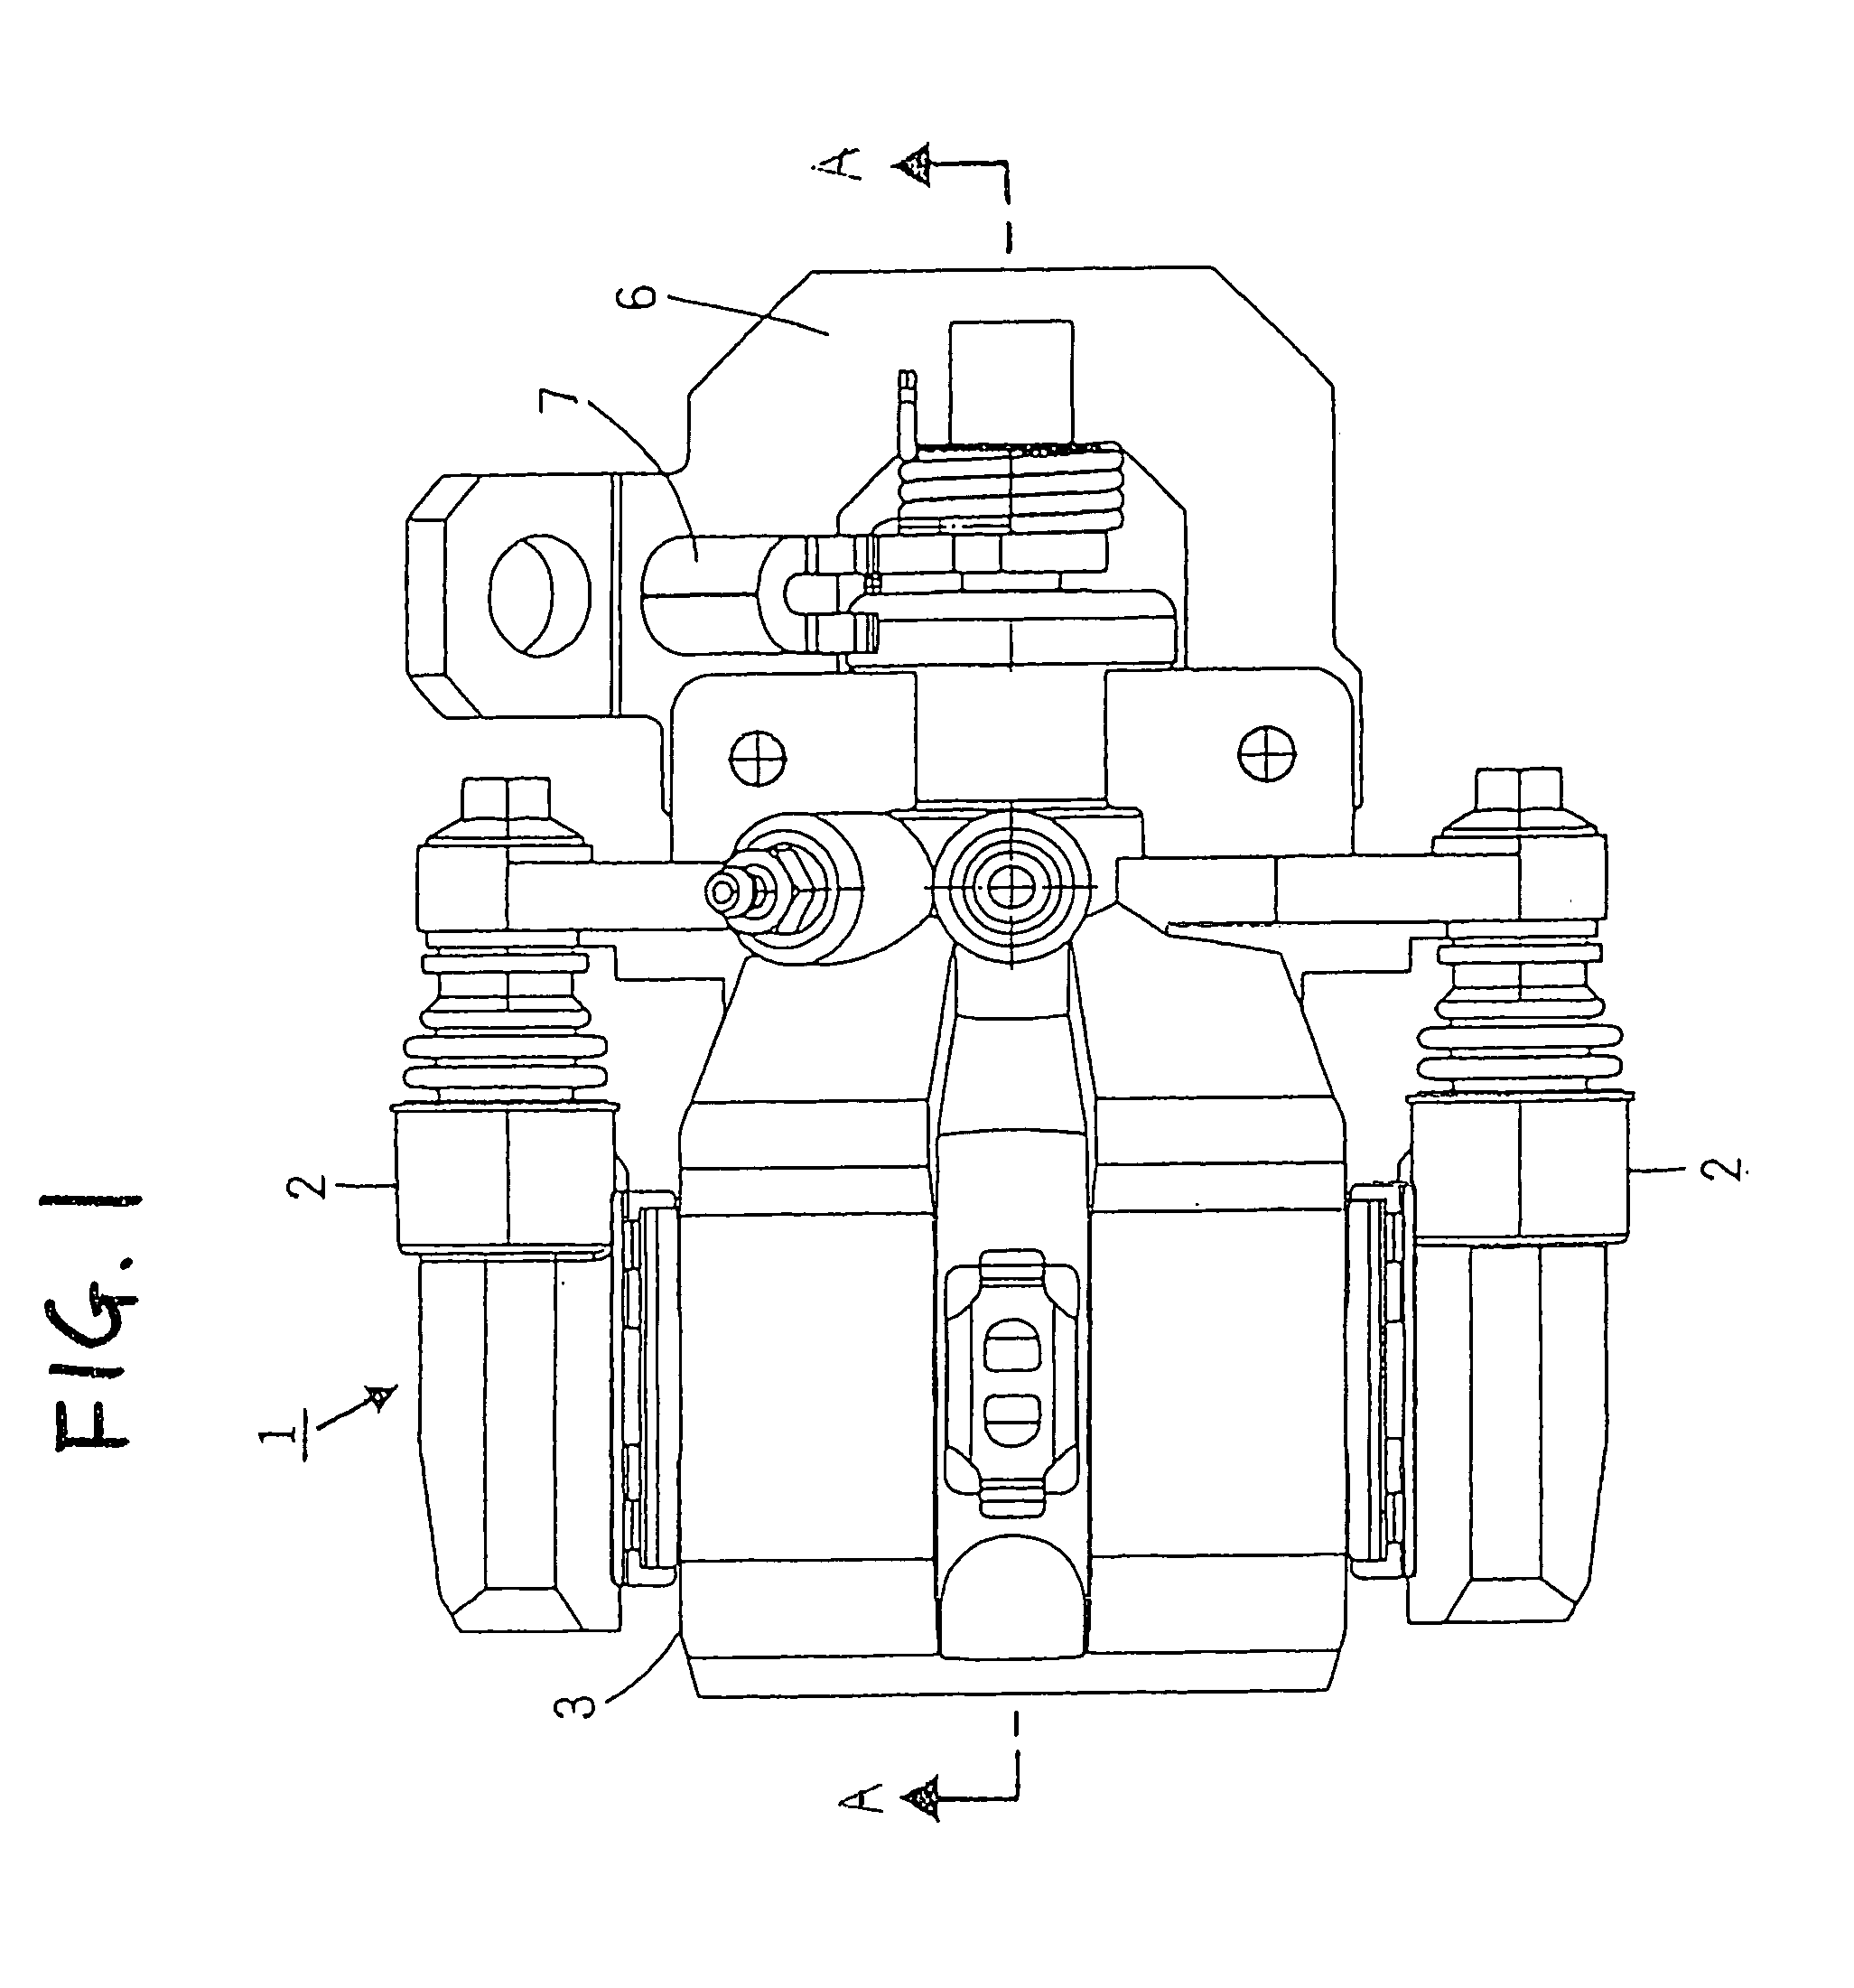 Brake apparatus having automatic clearance adjusting mechanism with overadjustment preventer